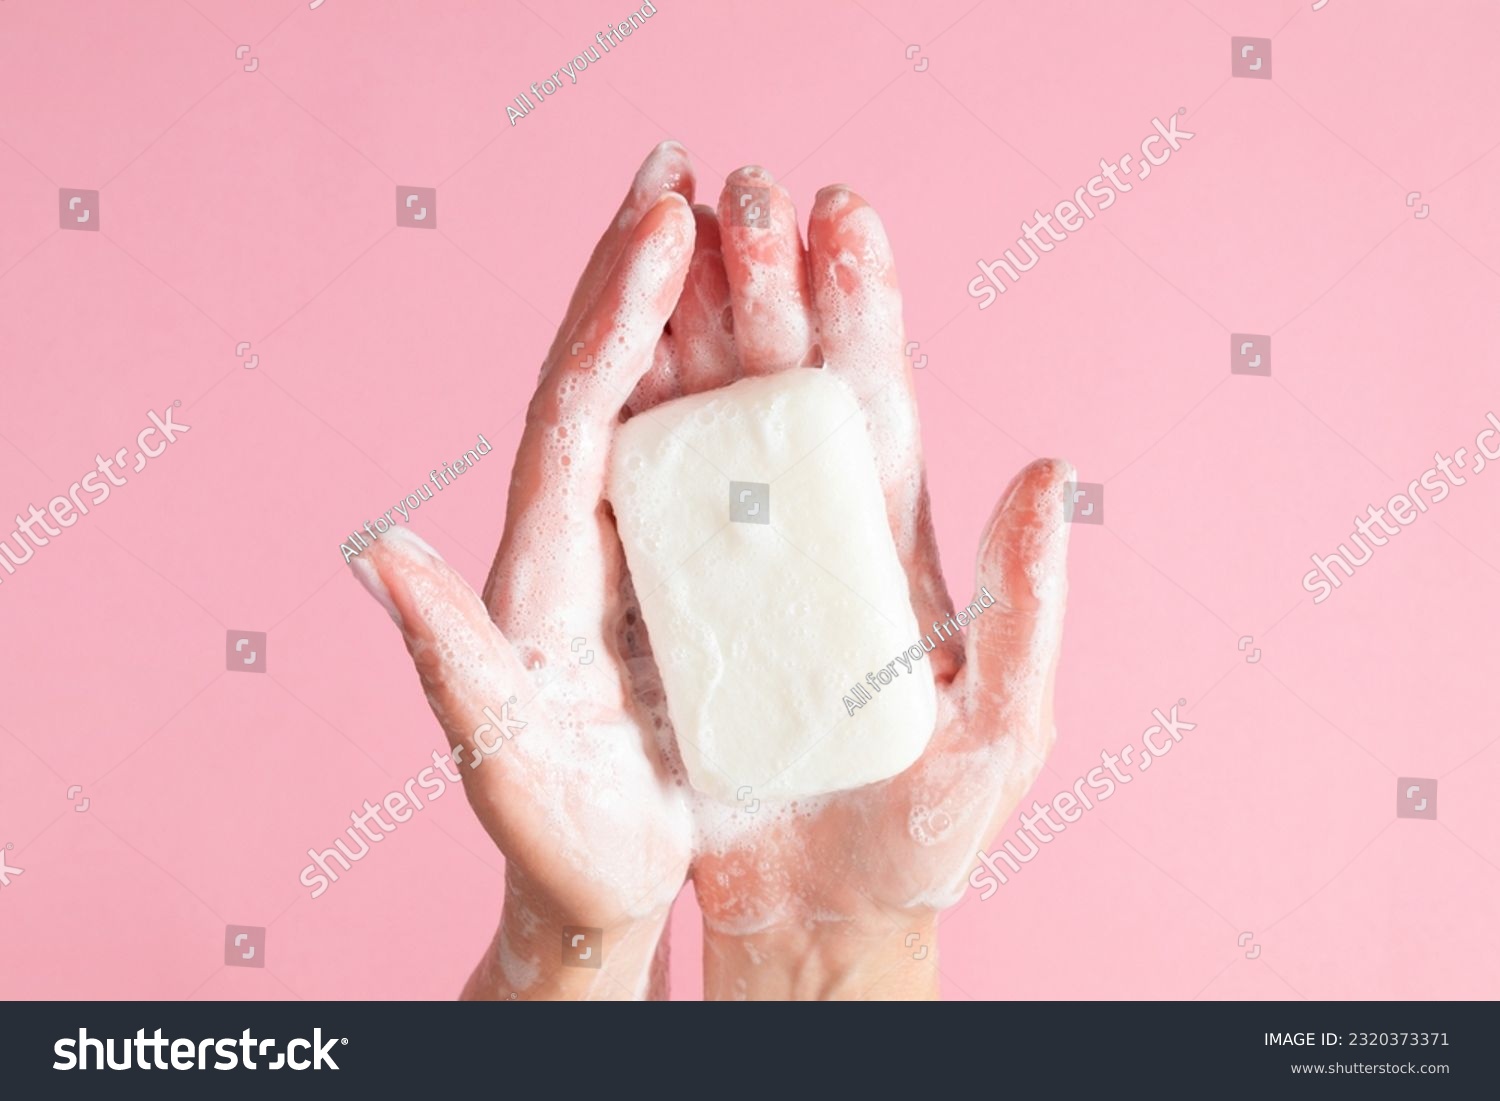 Washing of hands with soap. Cleaning hands. Closeup on woman hands with soap bar on pastel pink background. #2320373371